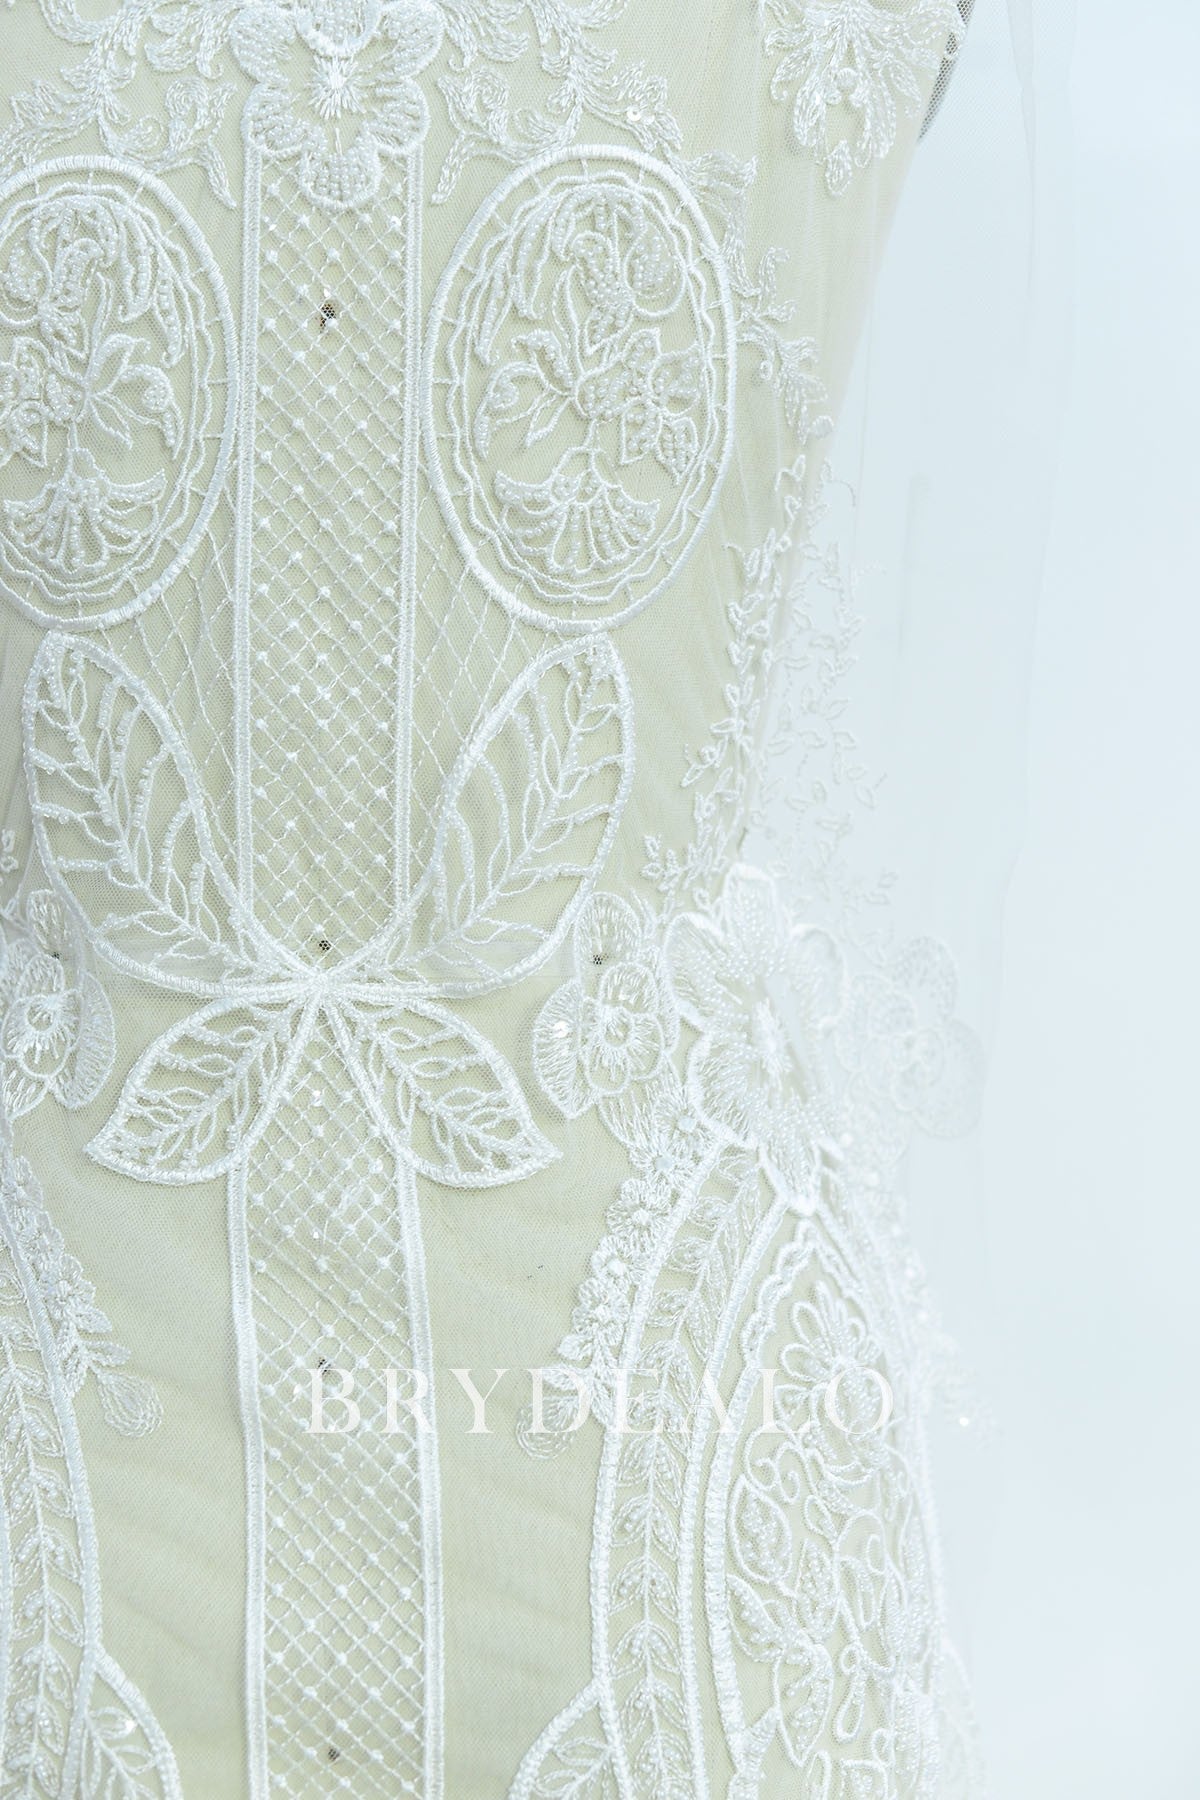 Designer Beaded Baroque Bridal Lace Fabric By the Yard